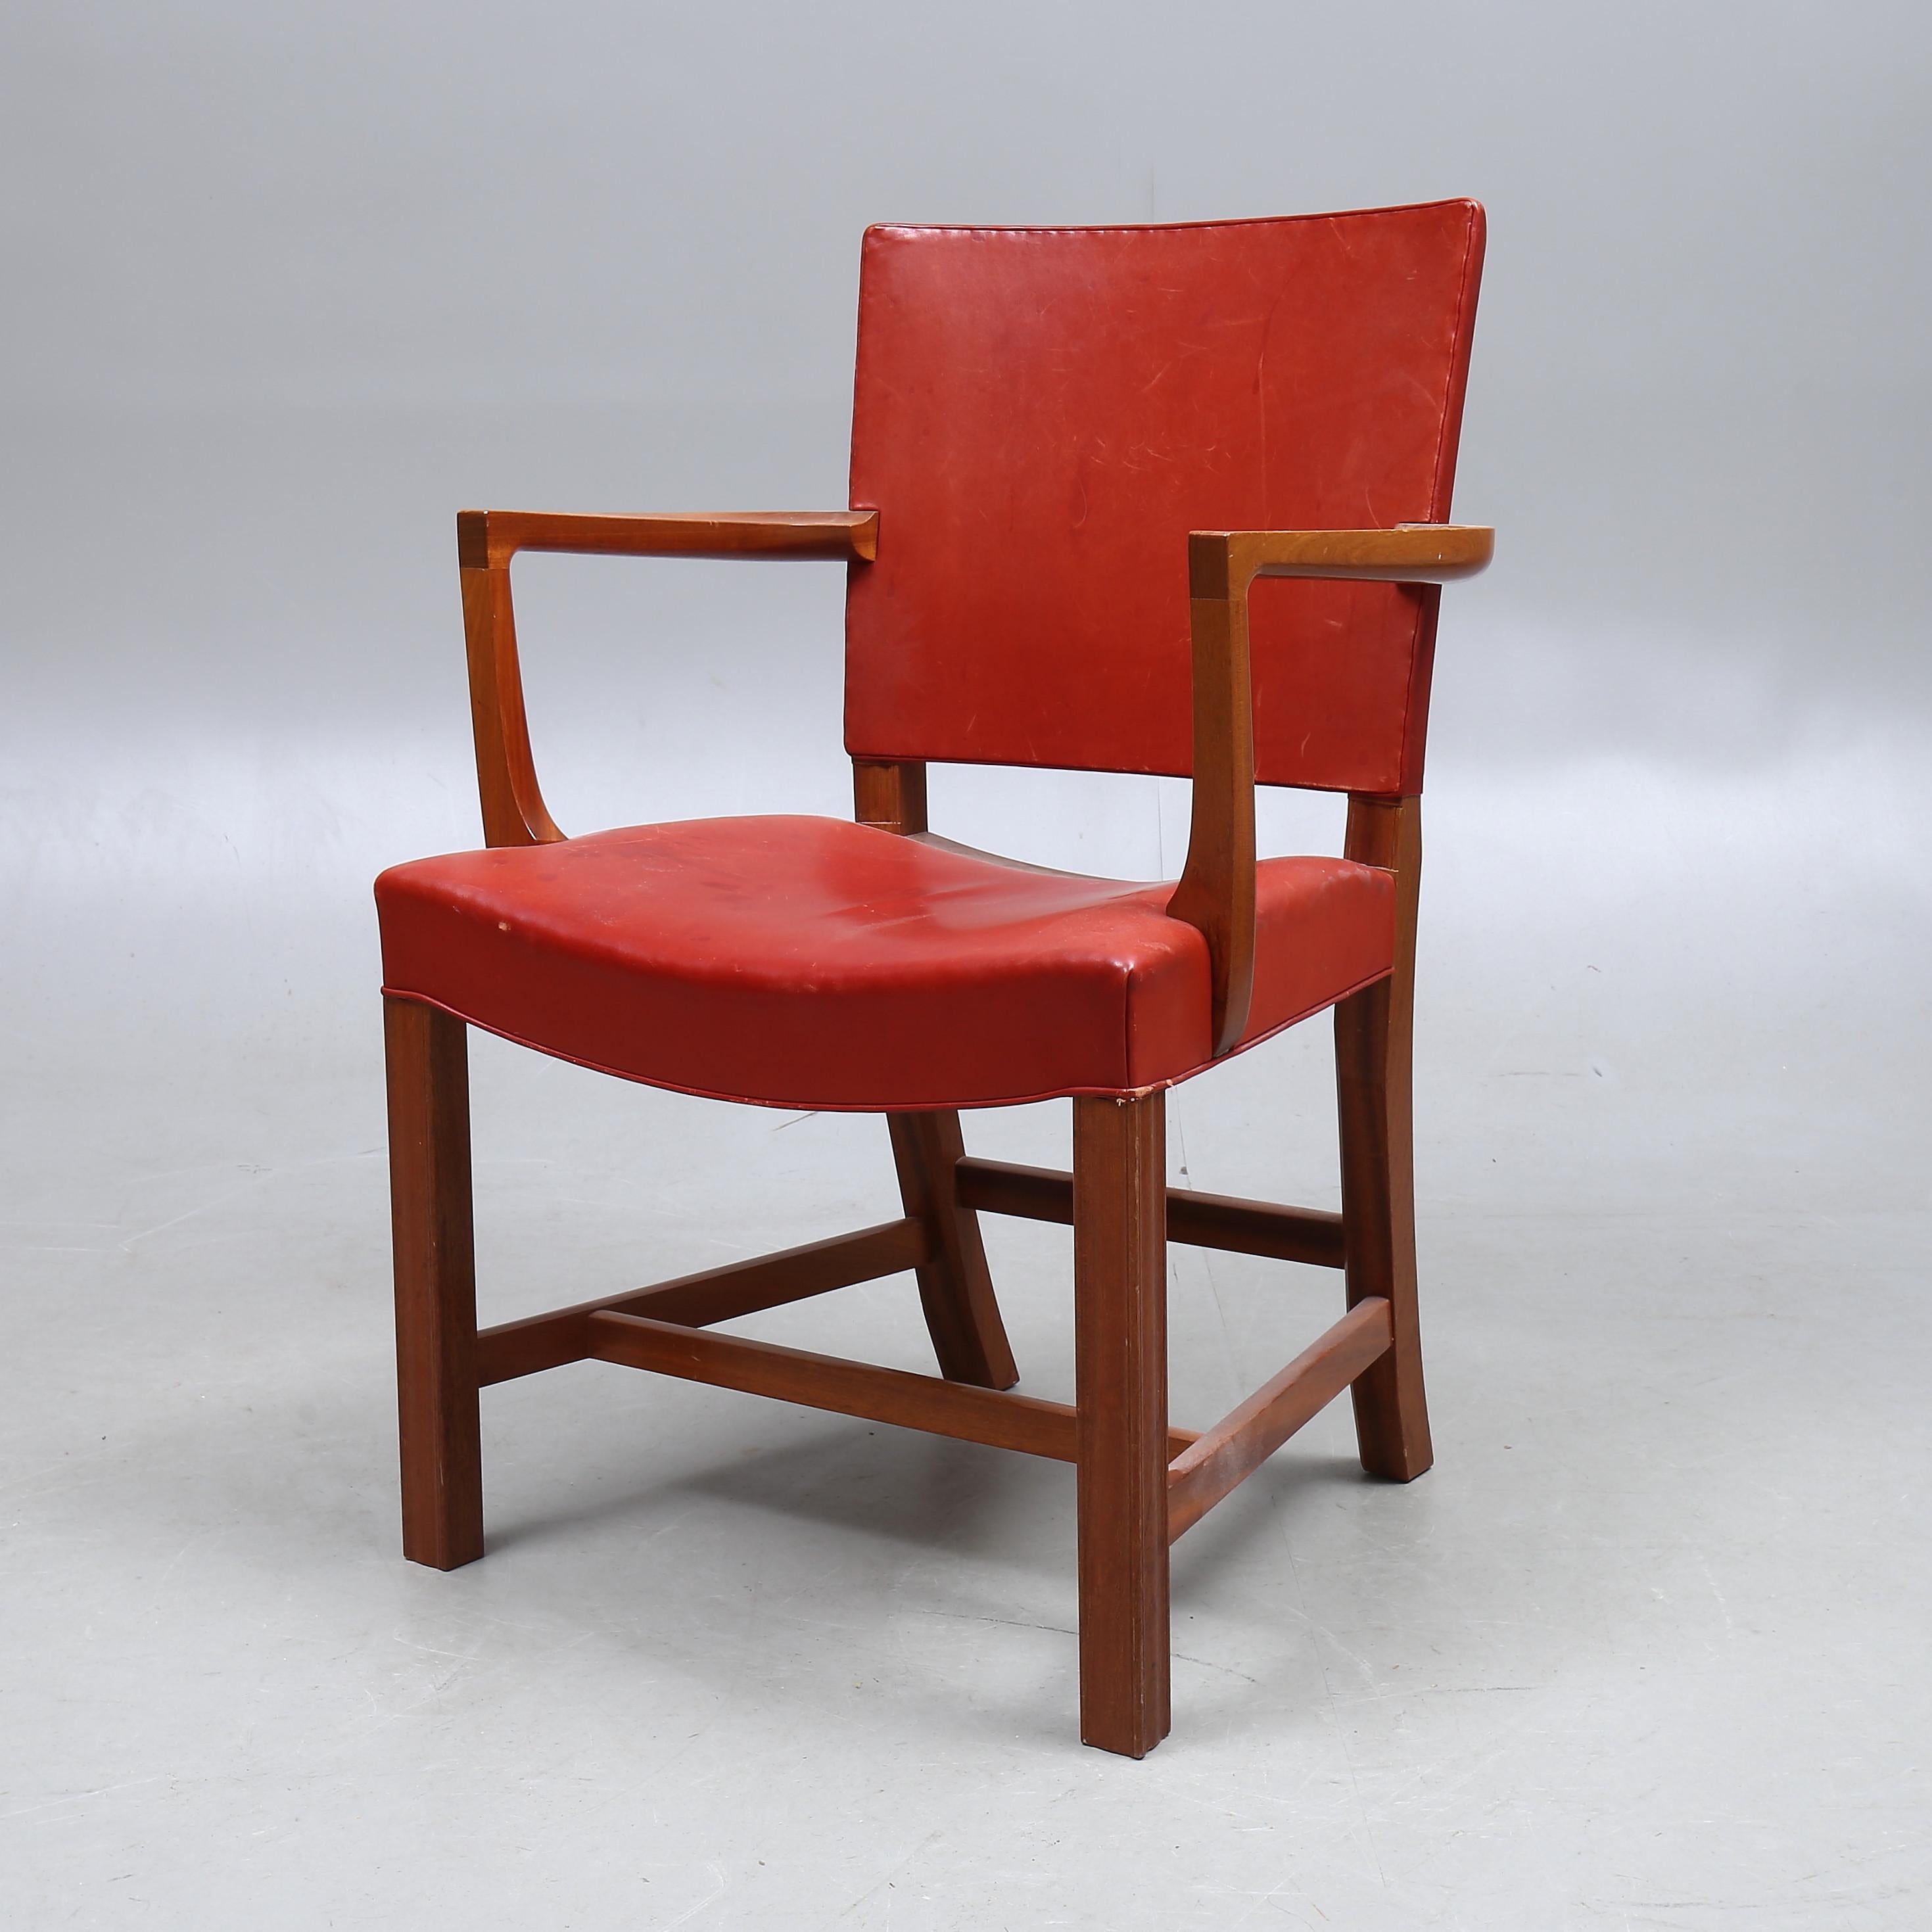 Mahogany frame covered in Indian red leather designed by Kaare Klint in 1927 for the lecture hall of the Danish Museum of Art & Design in Copenhagen and manufactured by Rud Rasmussens.

Ref: Kaare Klint, Harkær, pg. 28-30.